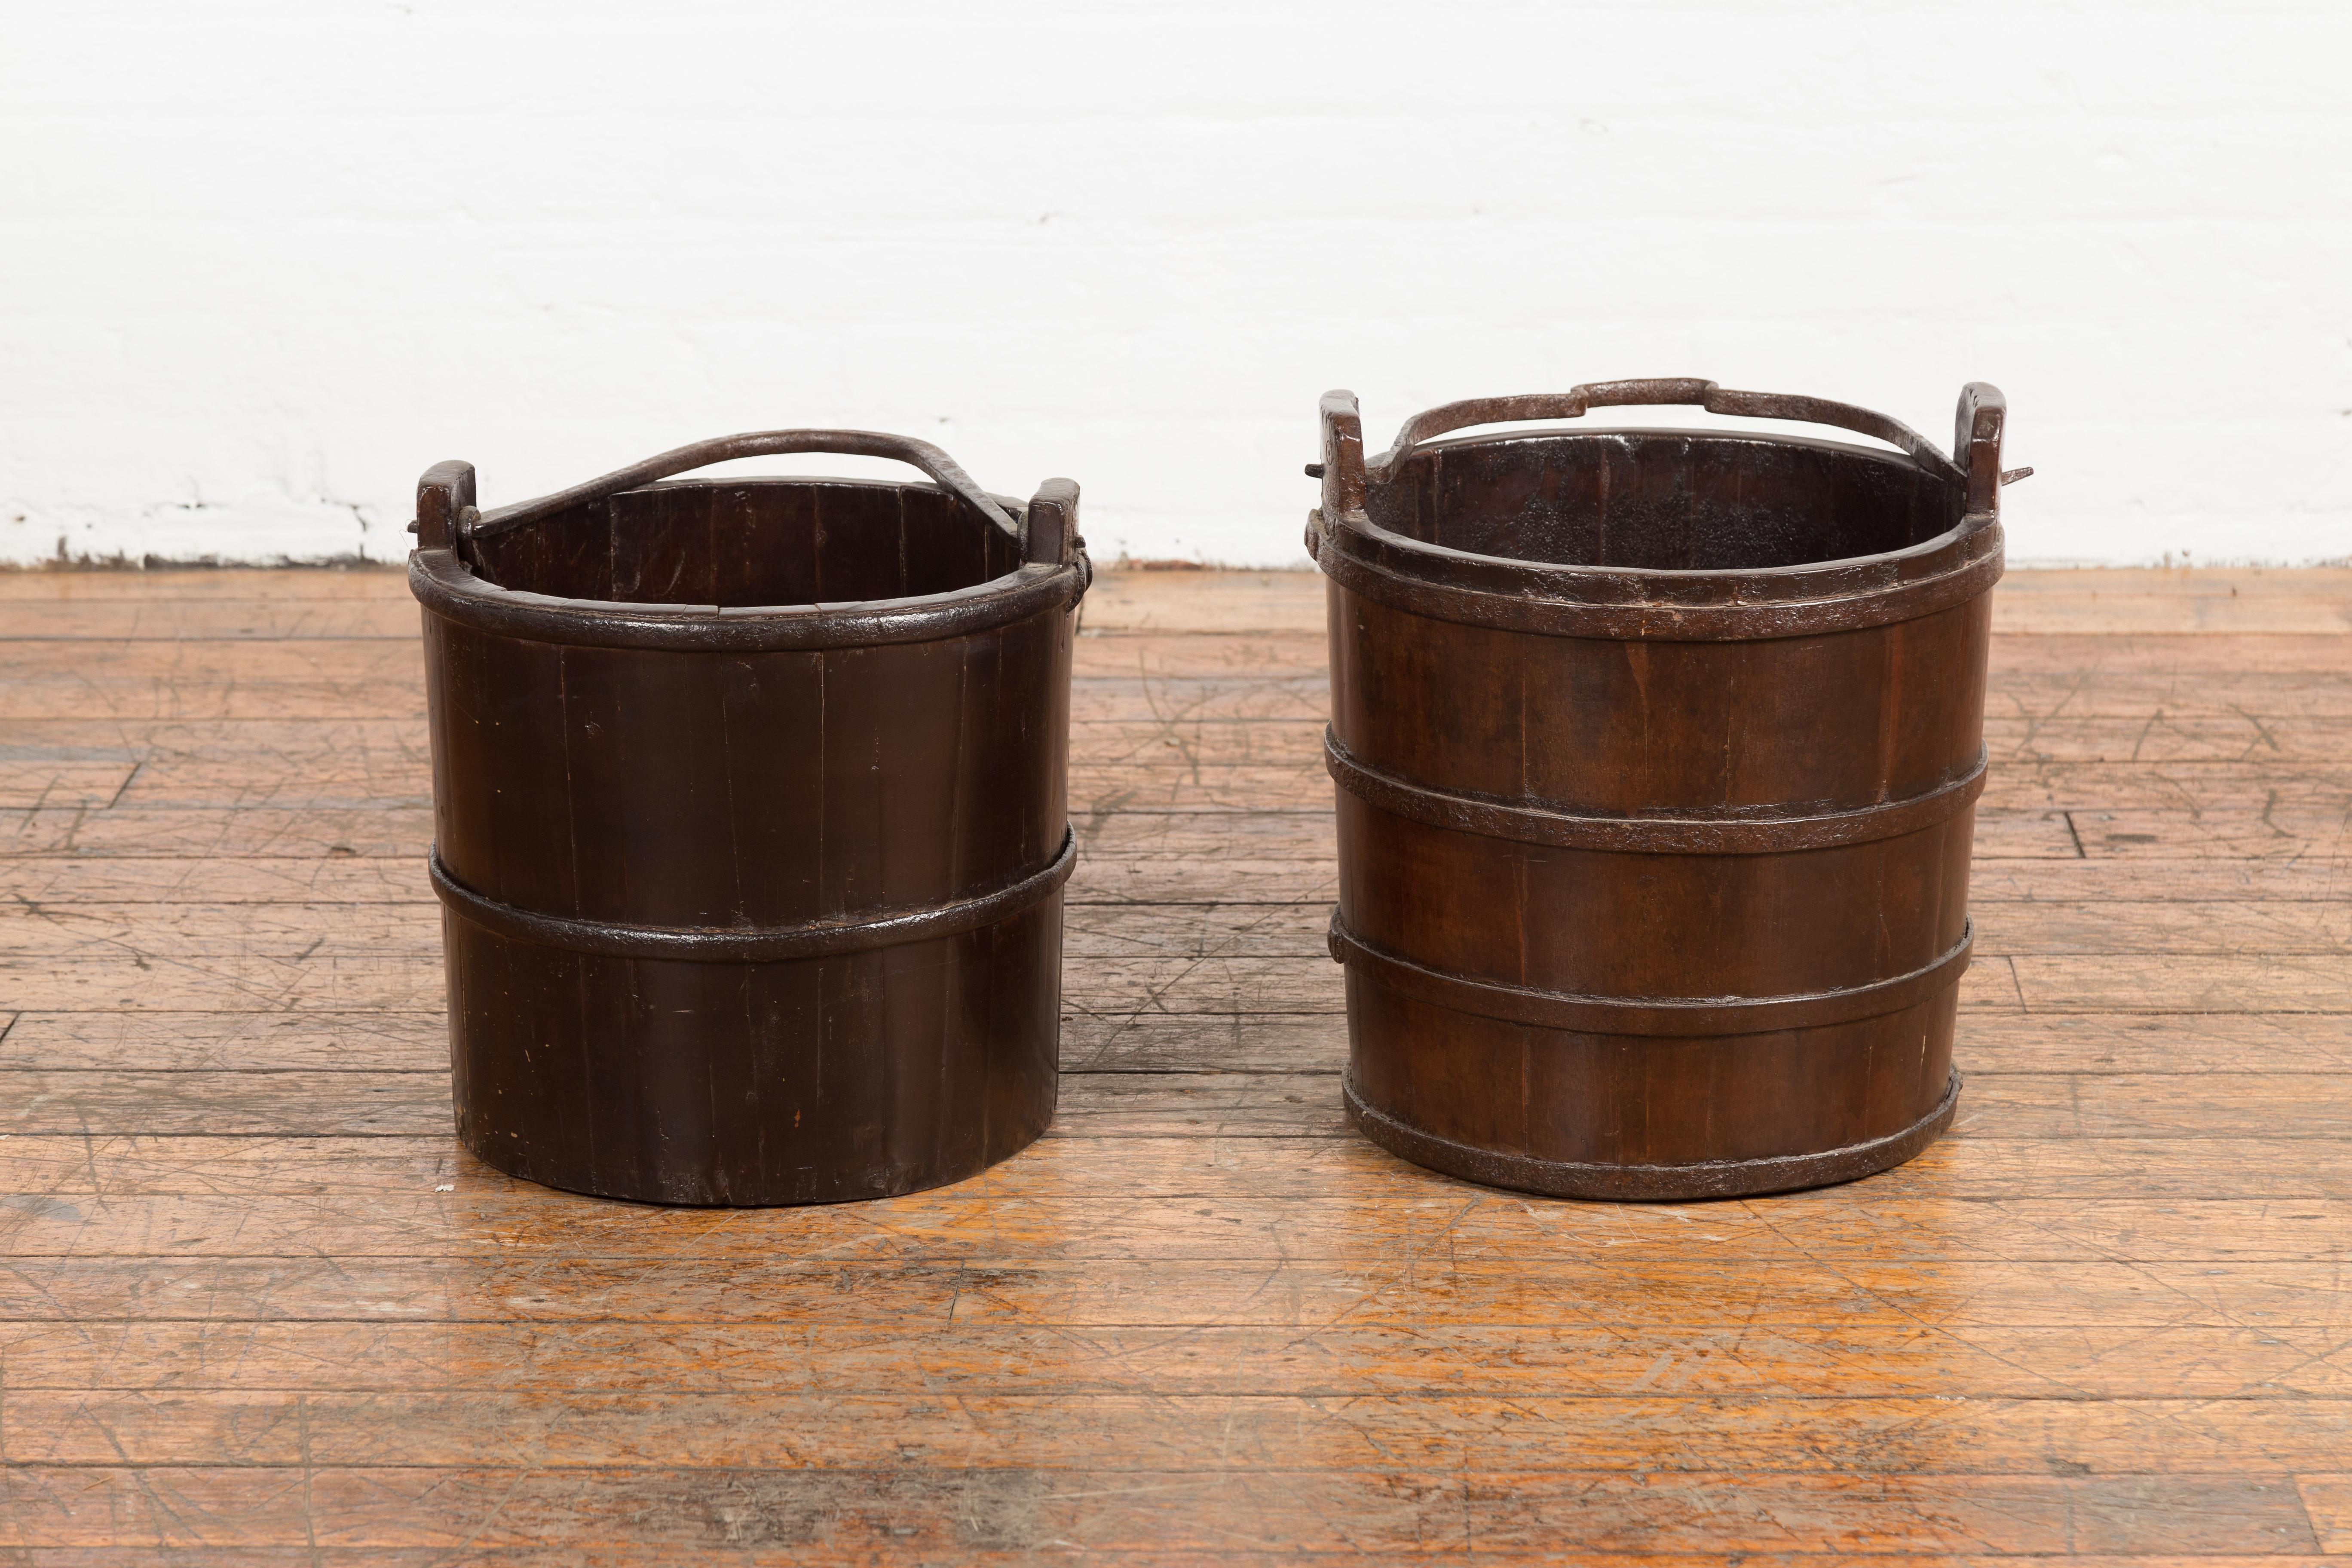 Two antique Chinese Qing Dynasty period wooden dark brown lacquered well buckets from the 19th century, with large metal handles and horizontal braces, priced and sold individually. These antique Chinese wooden dark brown lacquered well buckets from